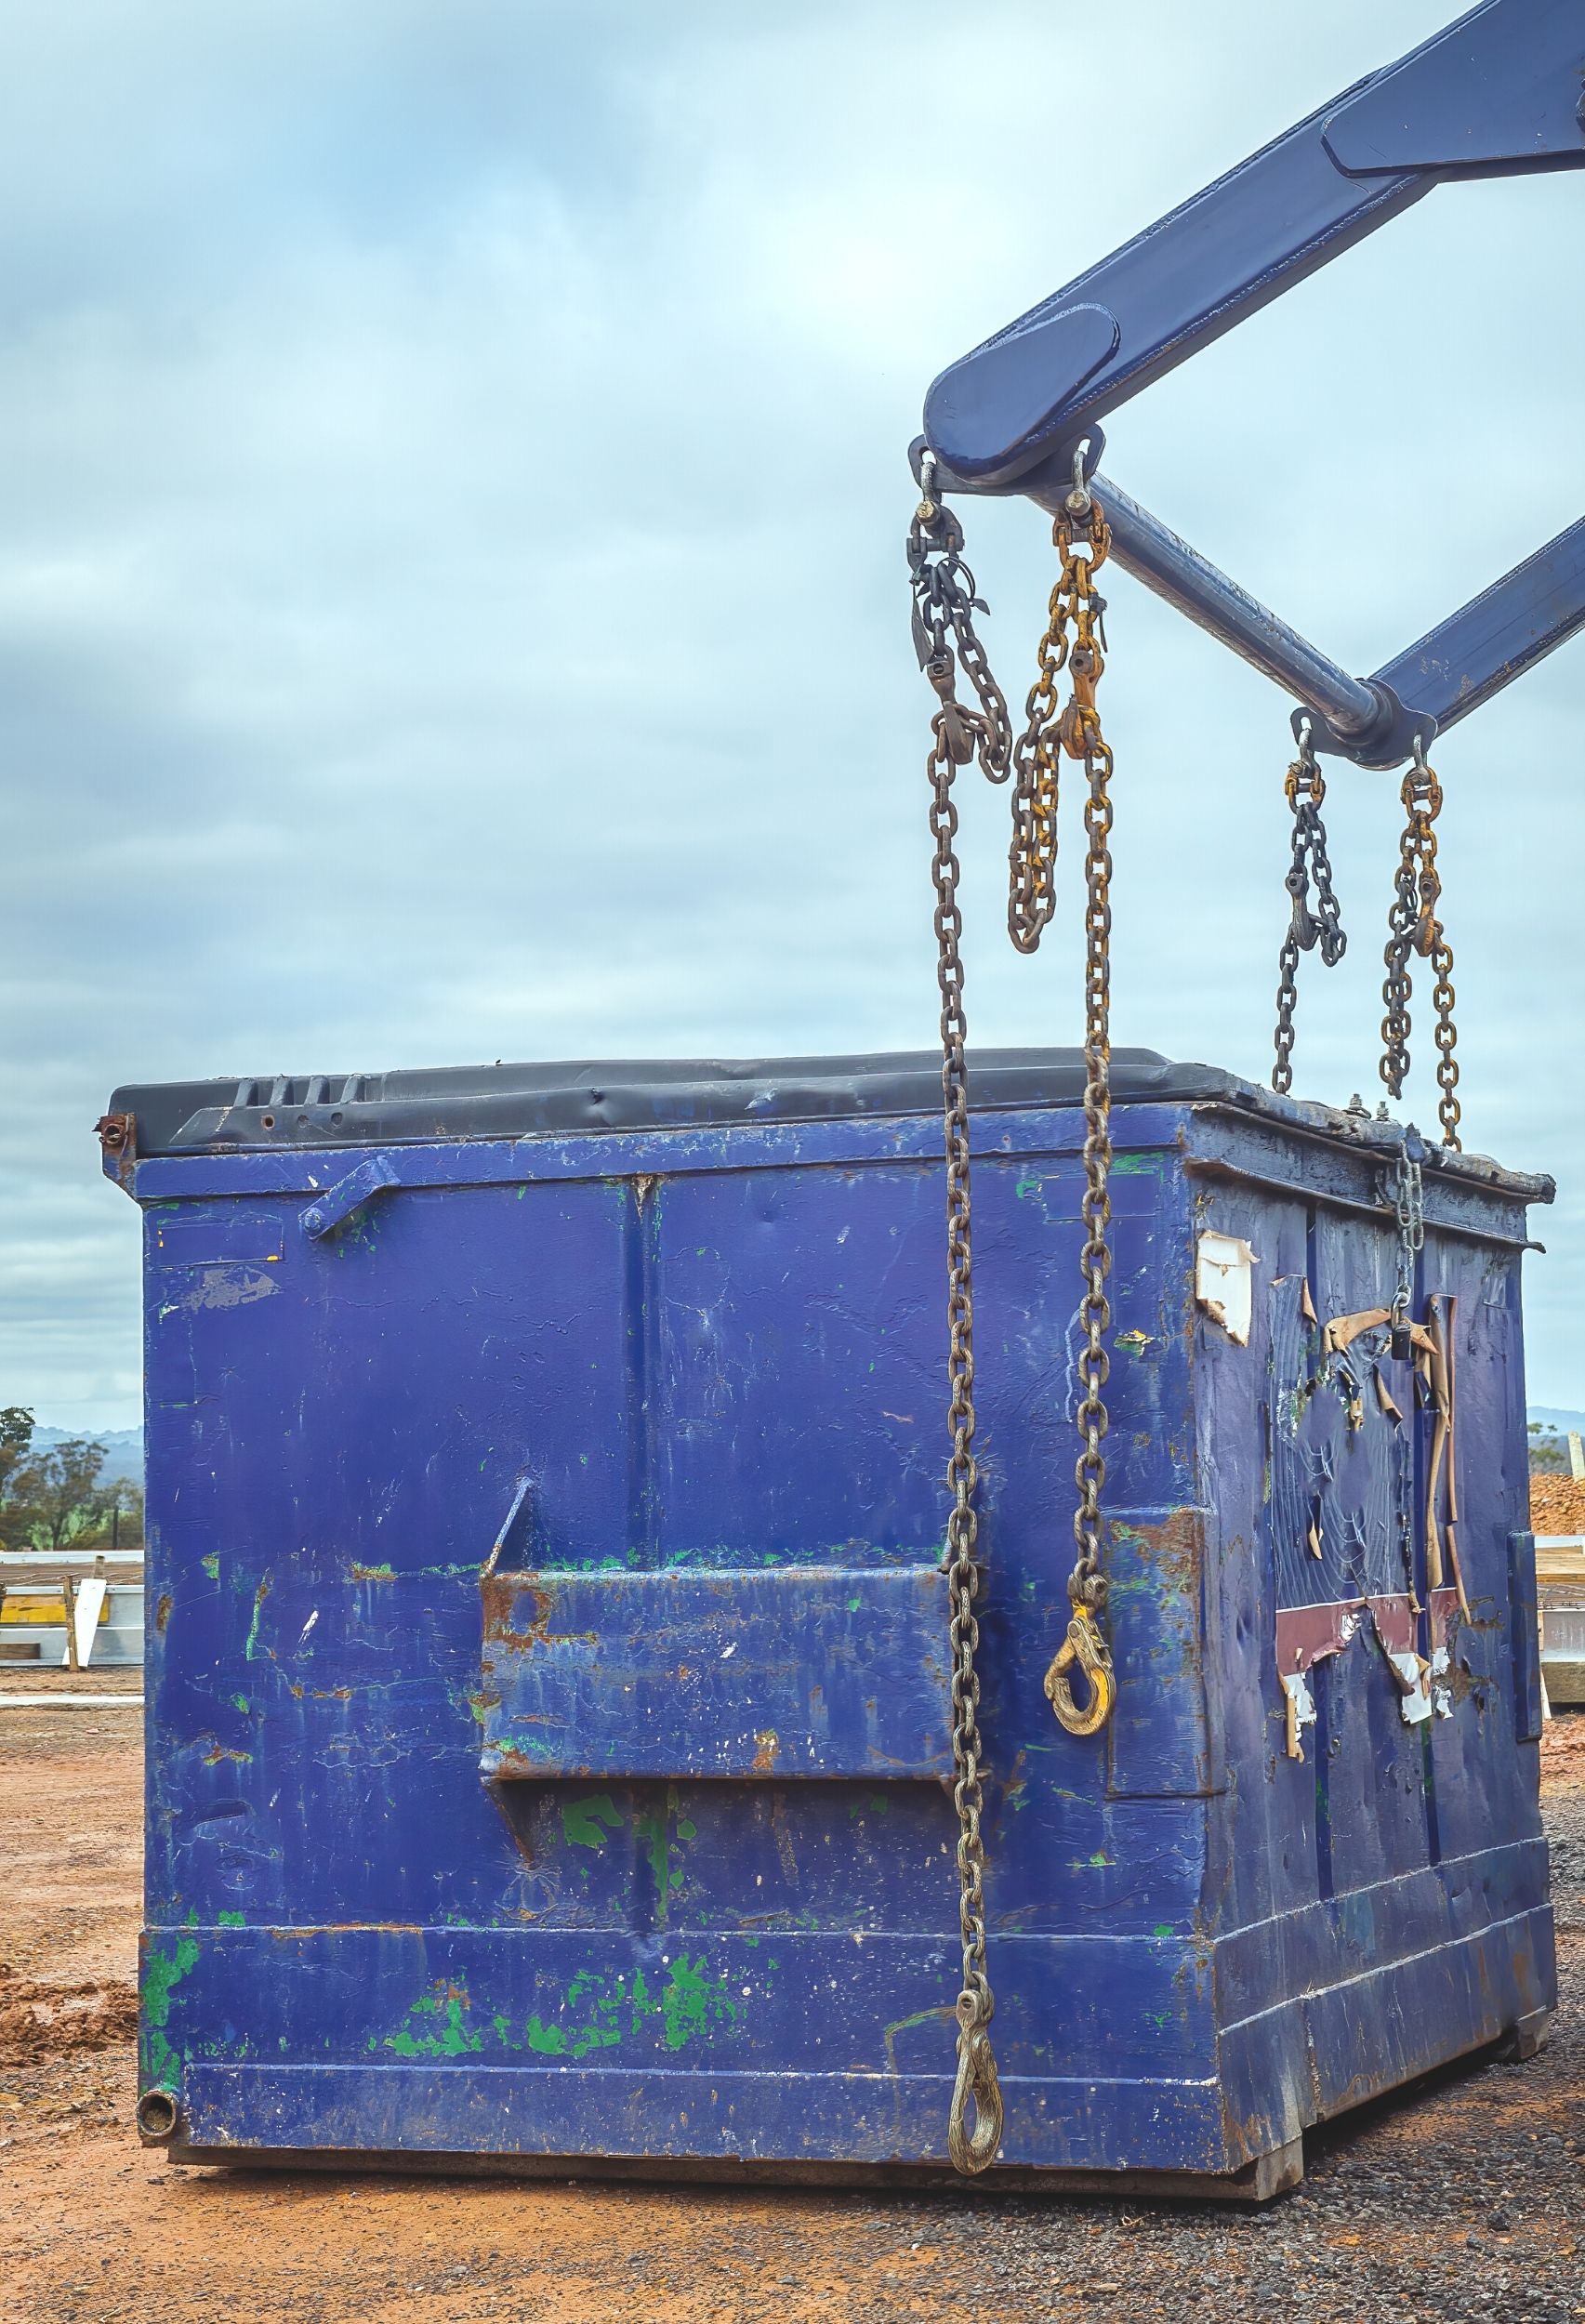 Risks Of Hiring Very Cheap Skip Bins In Adelaide And What To Look Out For - Rita Reviews